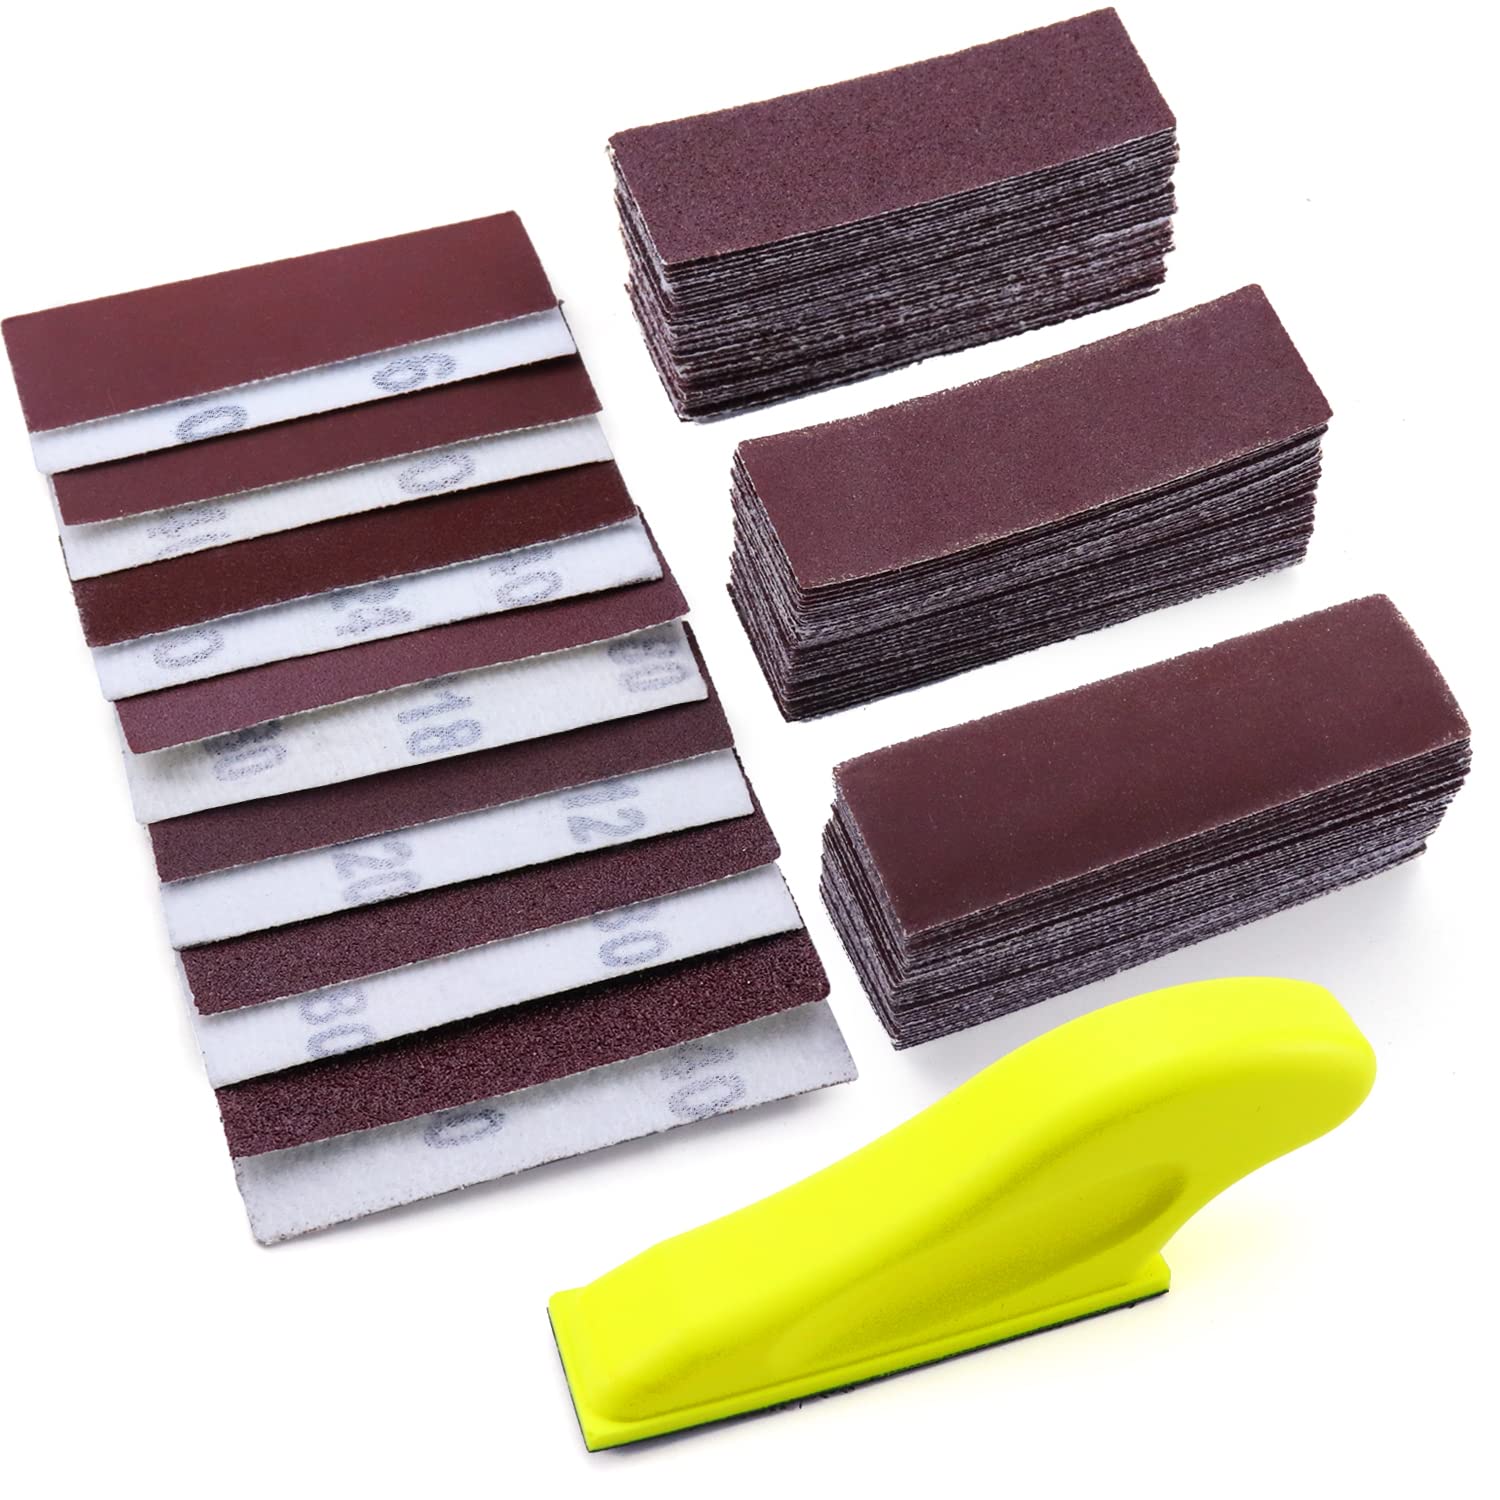 POLIWELL Micro Sanding Tools 3.5” x 1” Detail Sander for Small Projects, Mini Handle Sander Kit+ Sandpaper 40 80 120 180 240 400 600 Grit for Crafts Wood Finishing Tight Narrow Spaces, 120 PCS